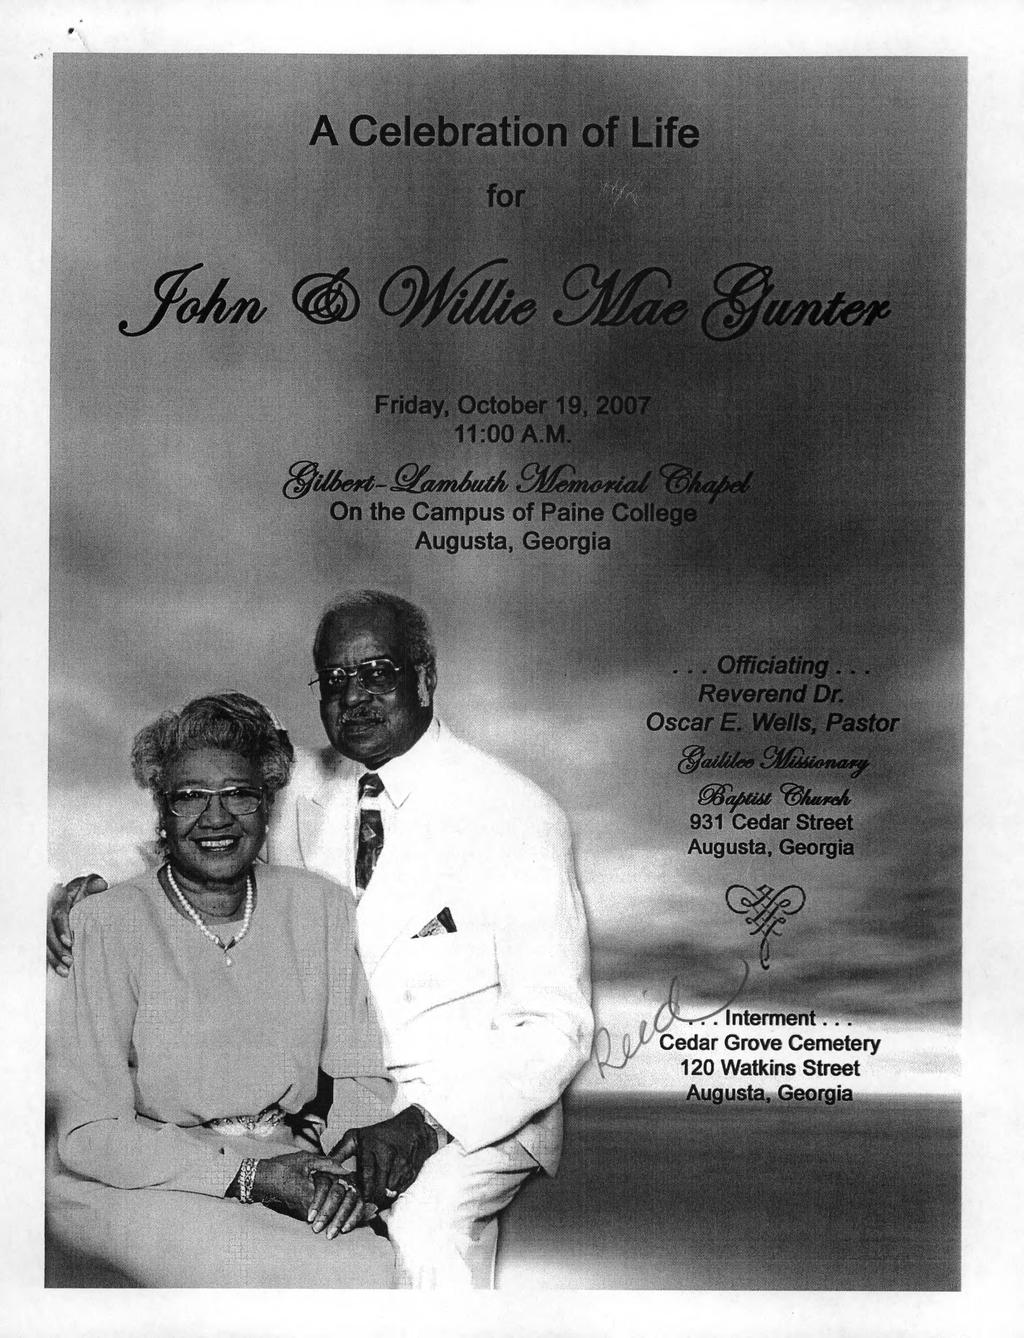 A Celebration of Life f Ji^ (J wnfap Friday, October 19, HiOOA.K* On the Campus of Paine Colleoc Augusta, Georgia.,, Officiating.